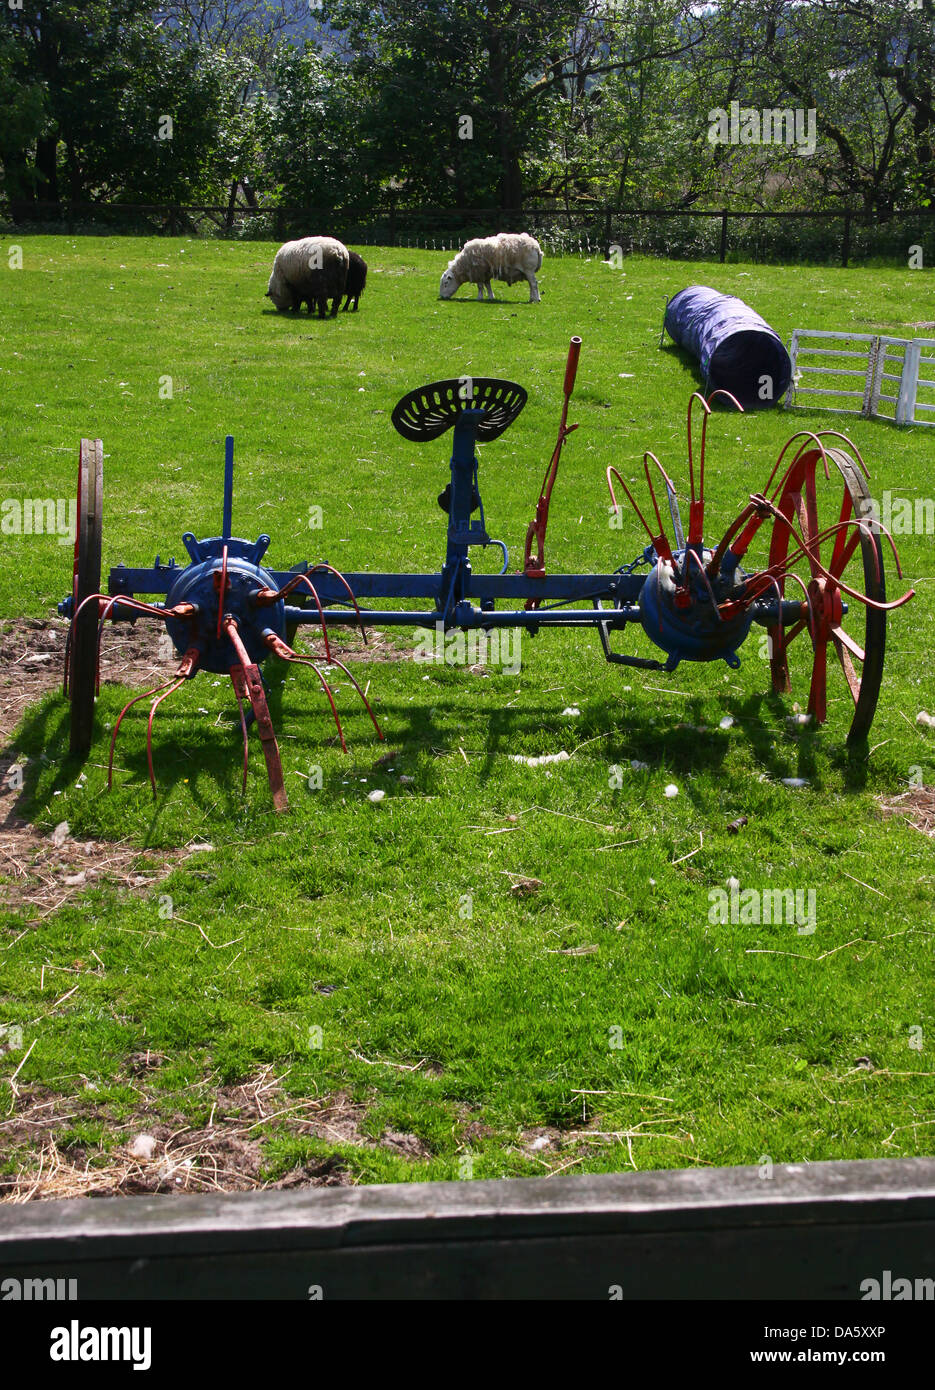 Old farm machinery in paddock with sheep Stock Photo